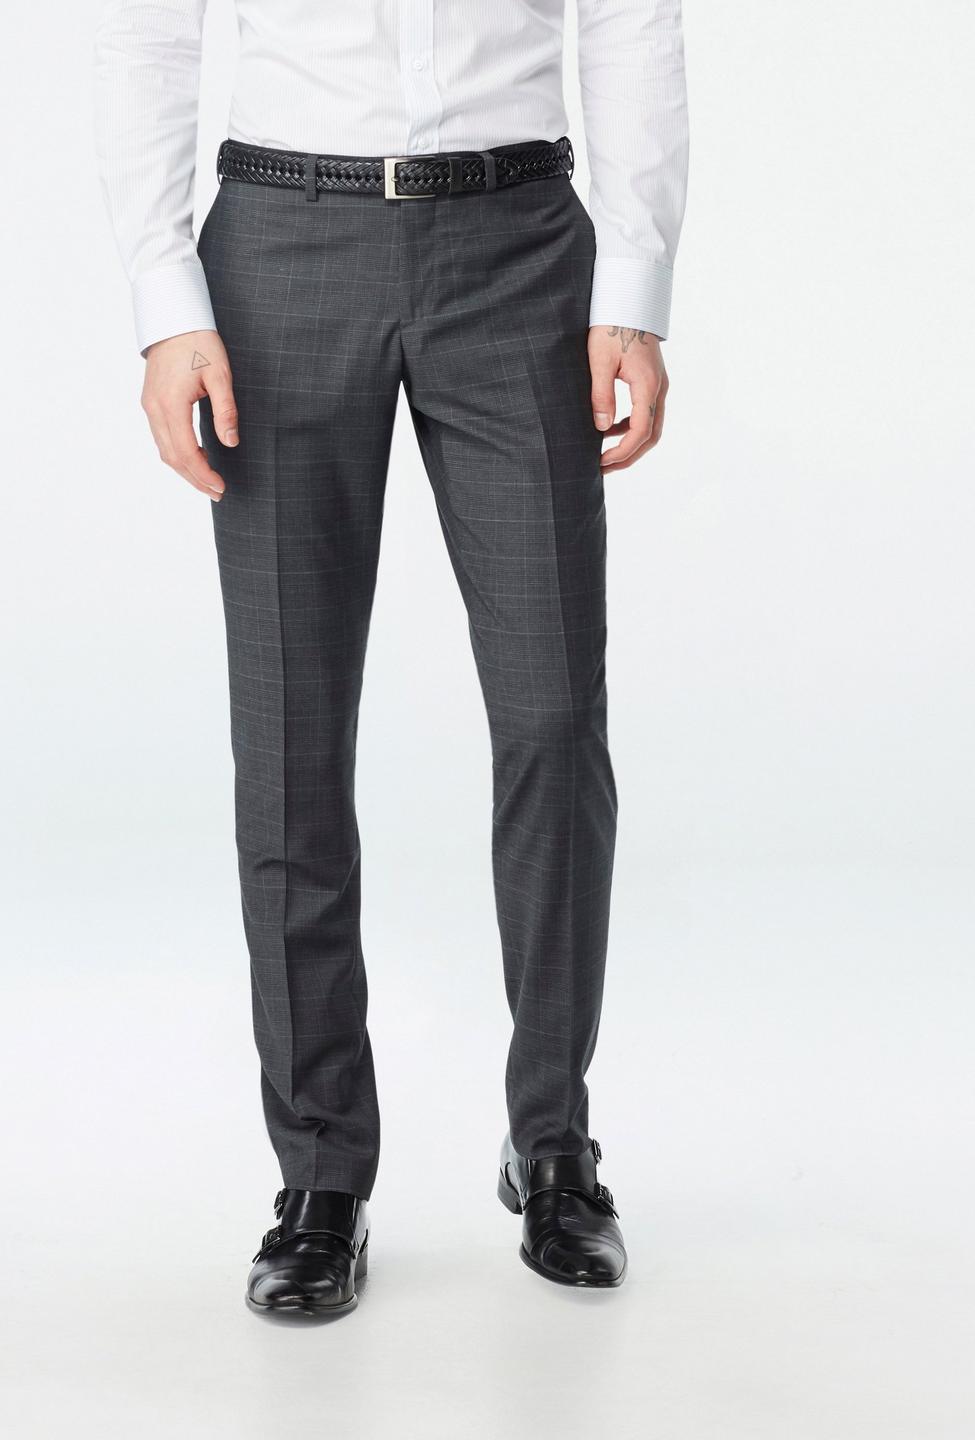 Gray pants - Hemsworth Plaid Design from Premium Indochino Collection